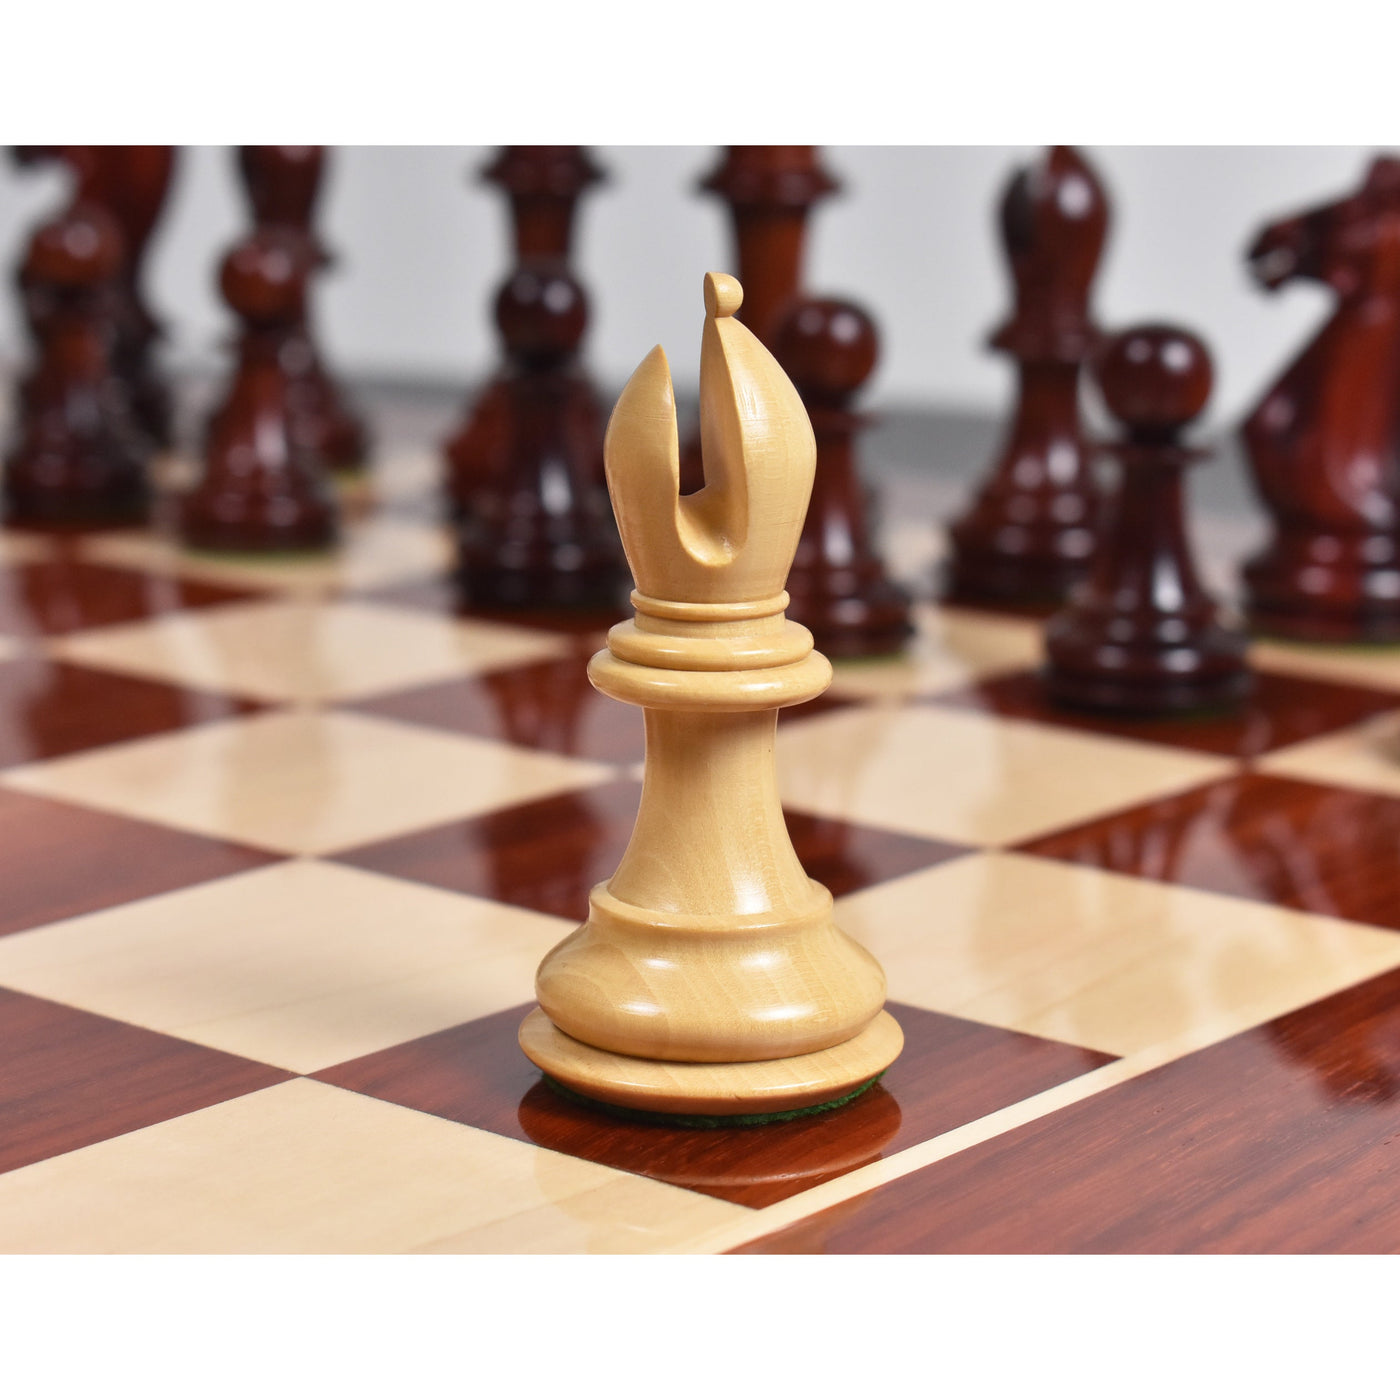 Slightly Imperfect 4.1″ Traveller Staunton Luxury Chess Set - Chess Pieces Only – Bud Rose Wood & Boxwood